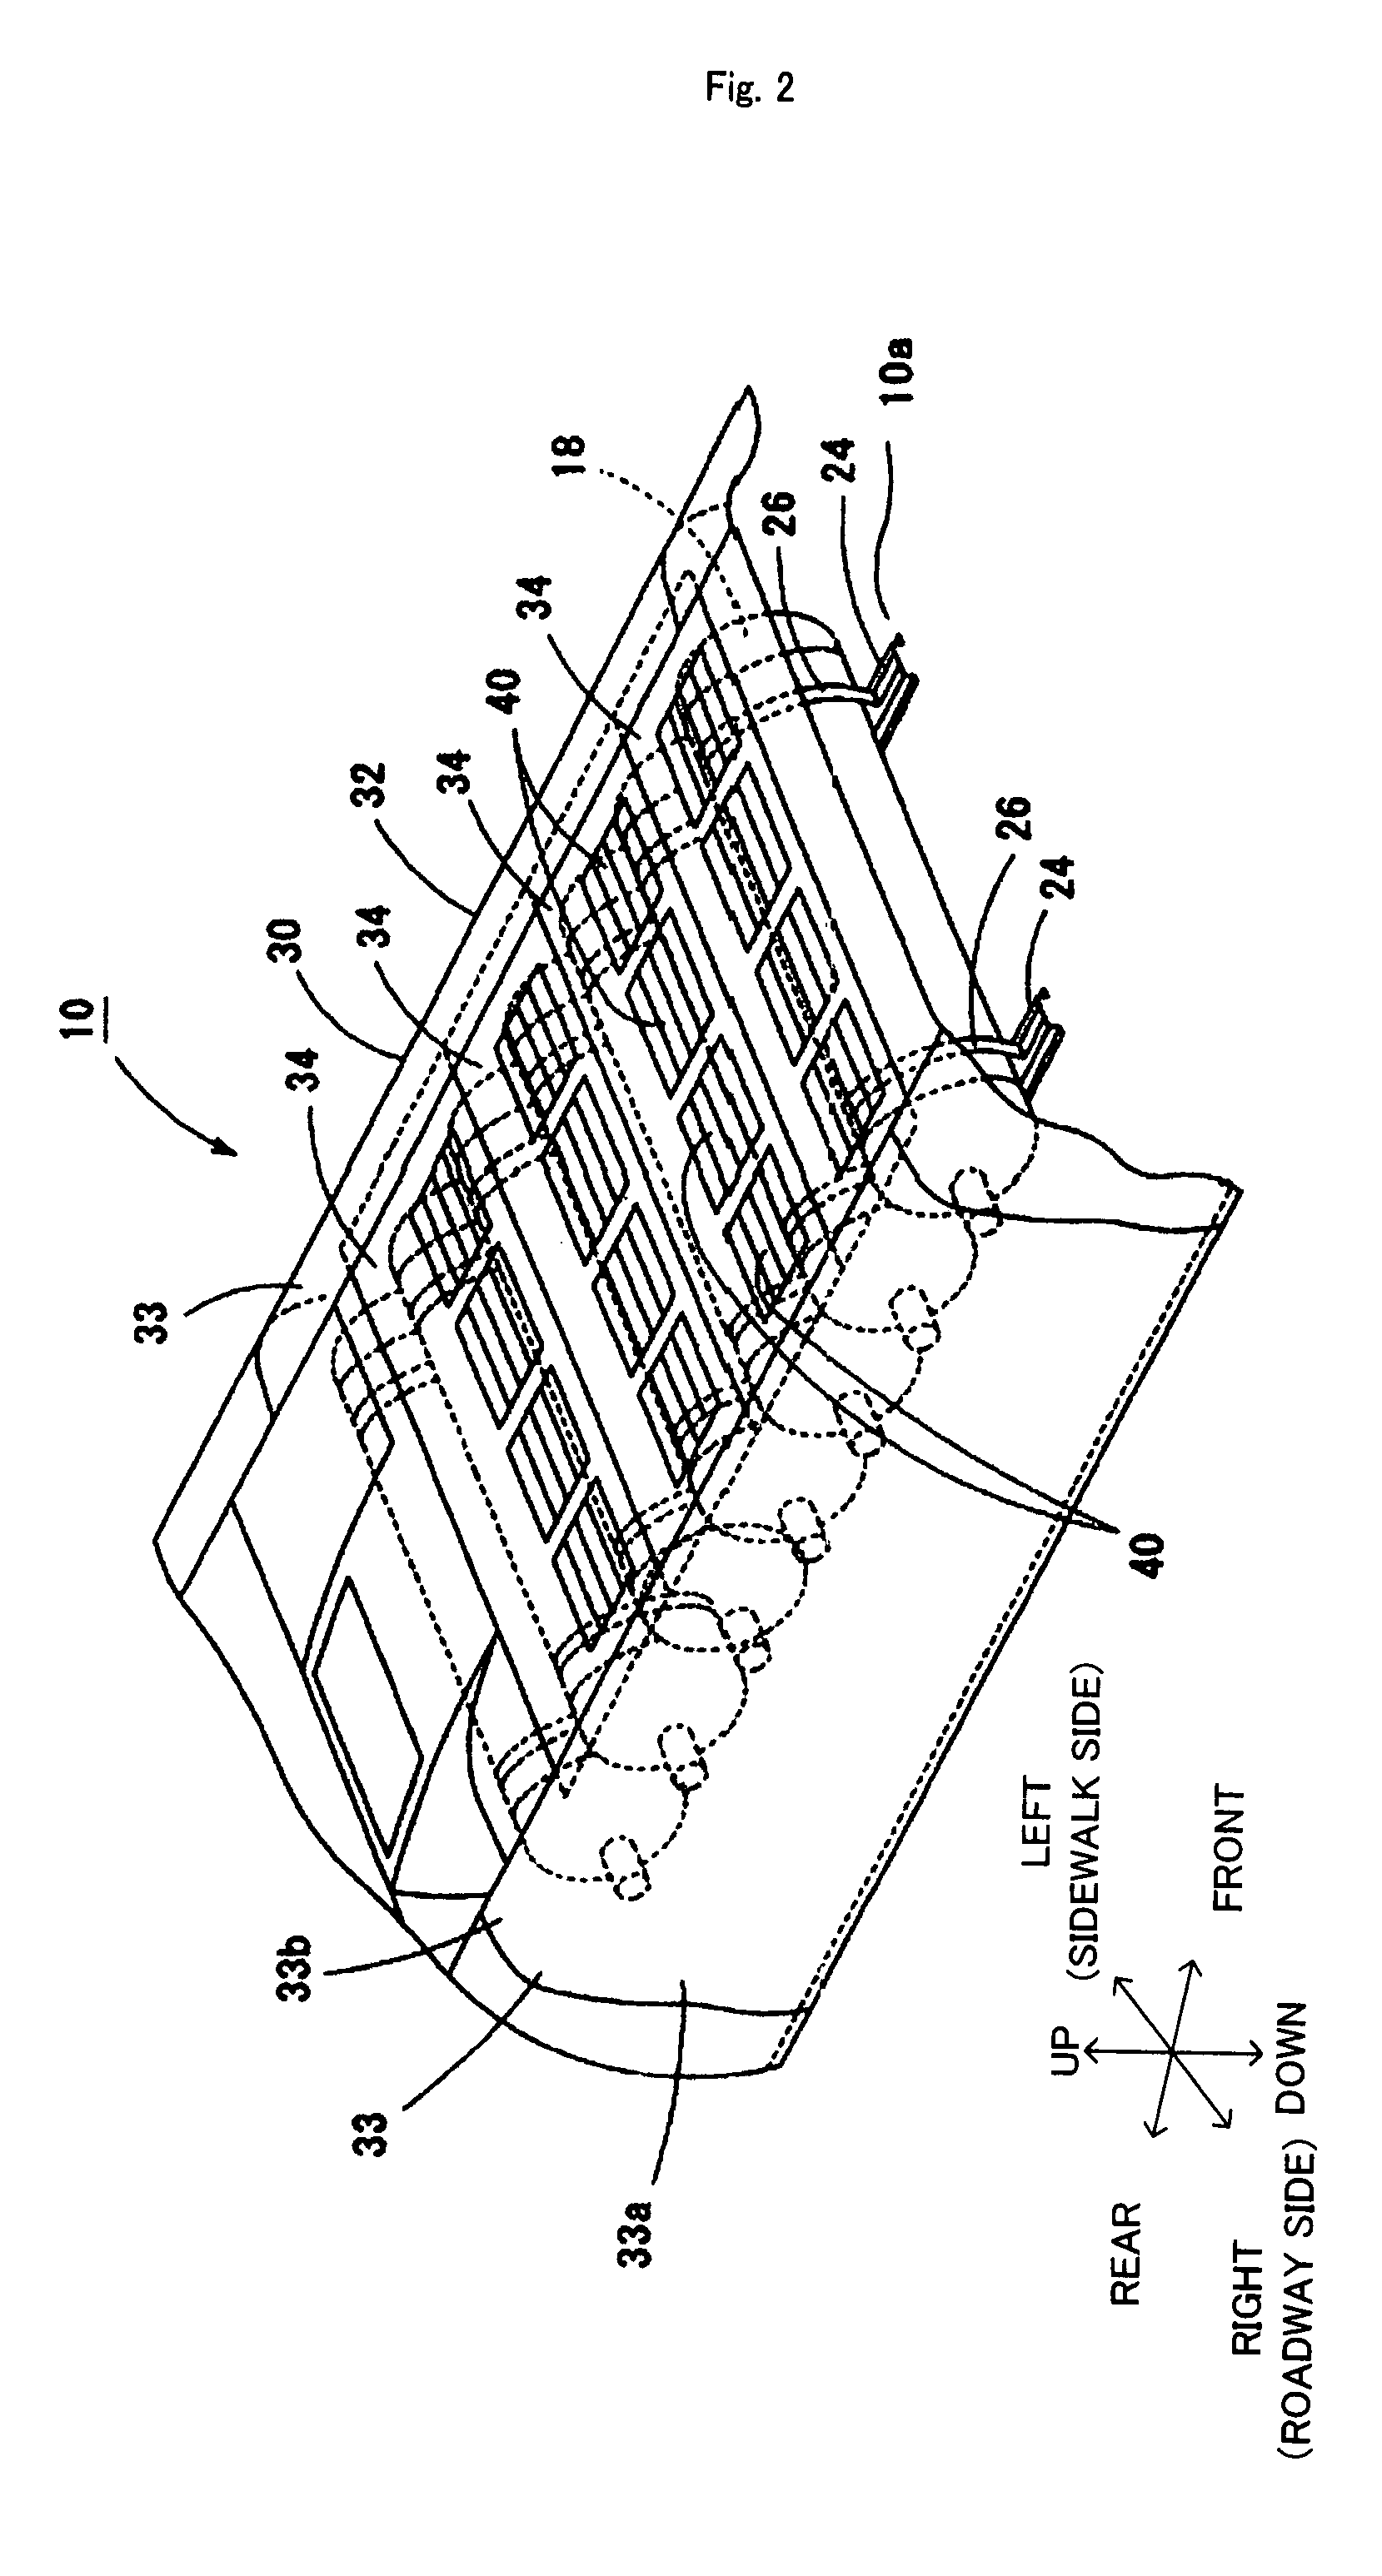 Gas fuel tank-equipped vehicle